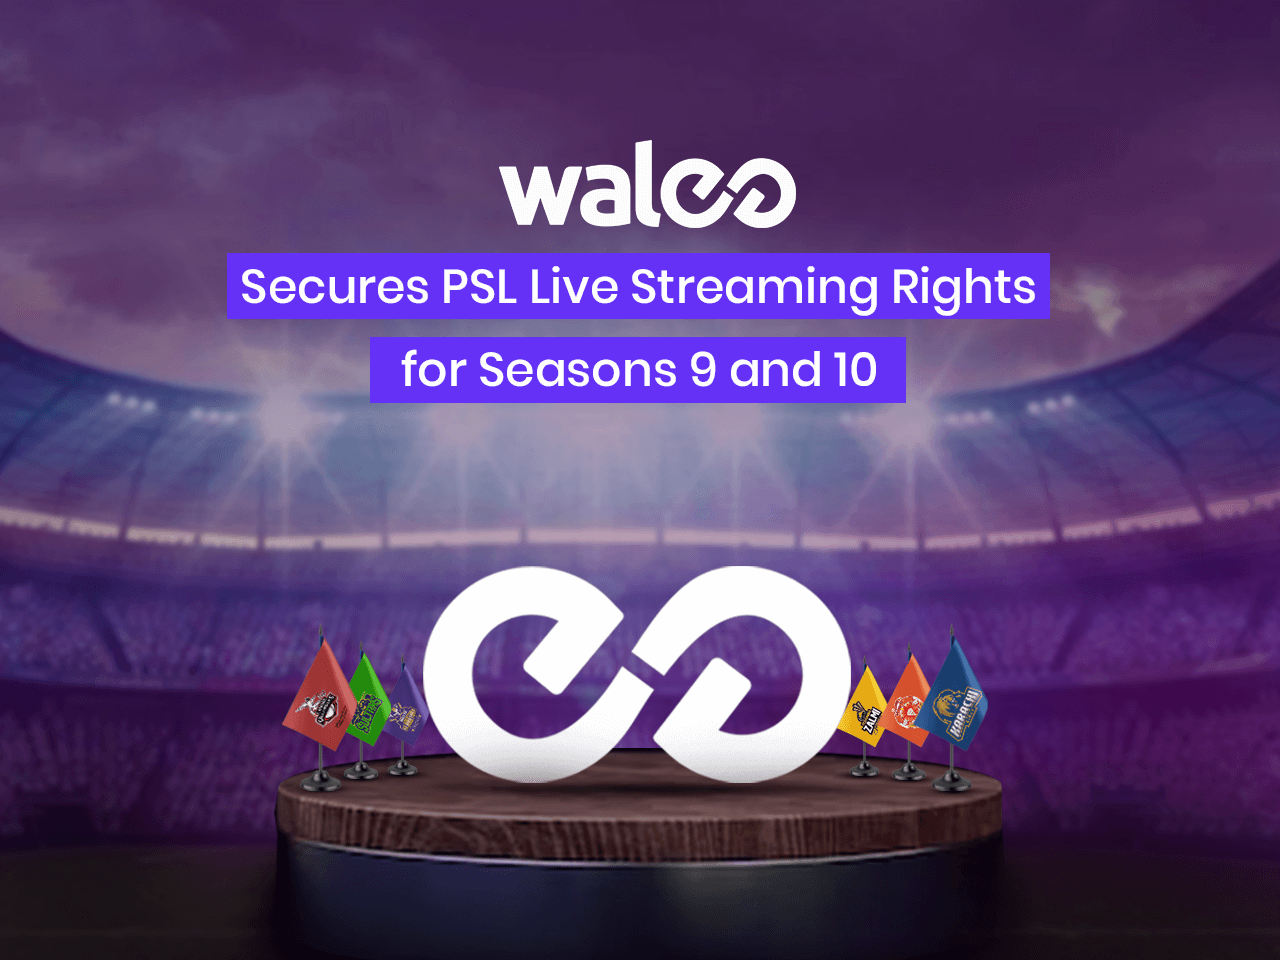 Walee Secures PSL Live Streaming Rights for Seasons 9 and 10